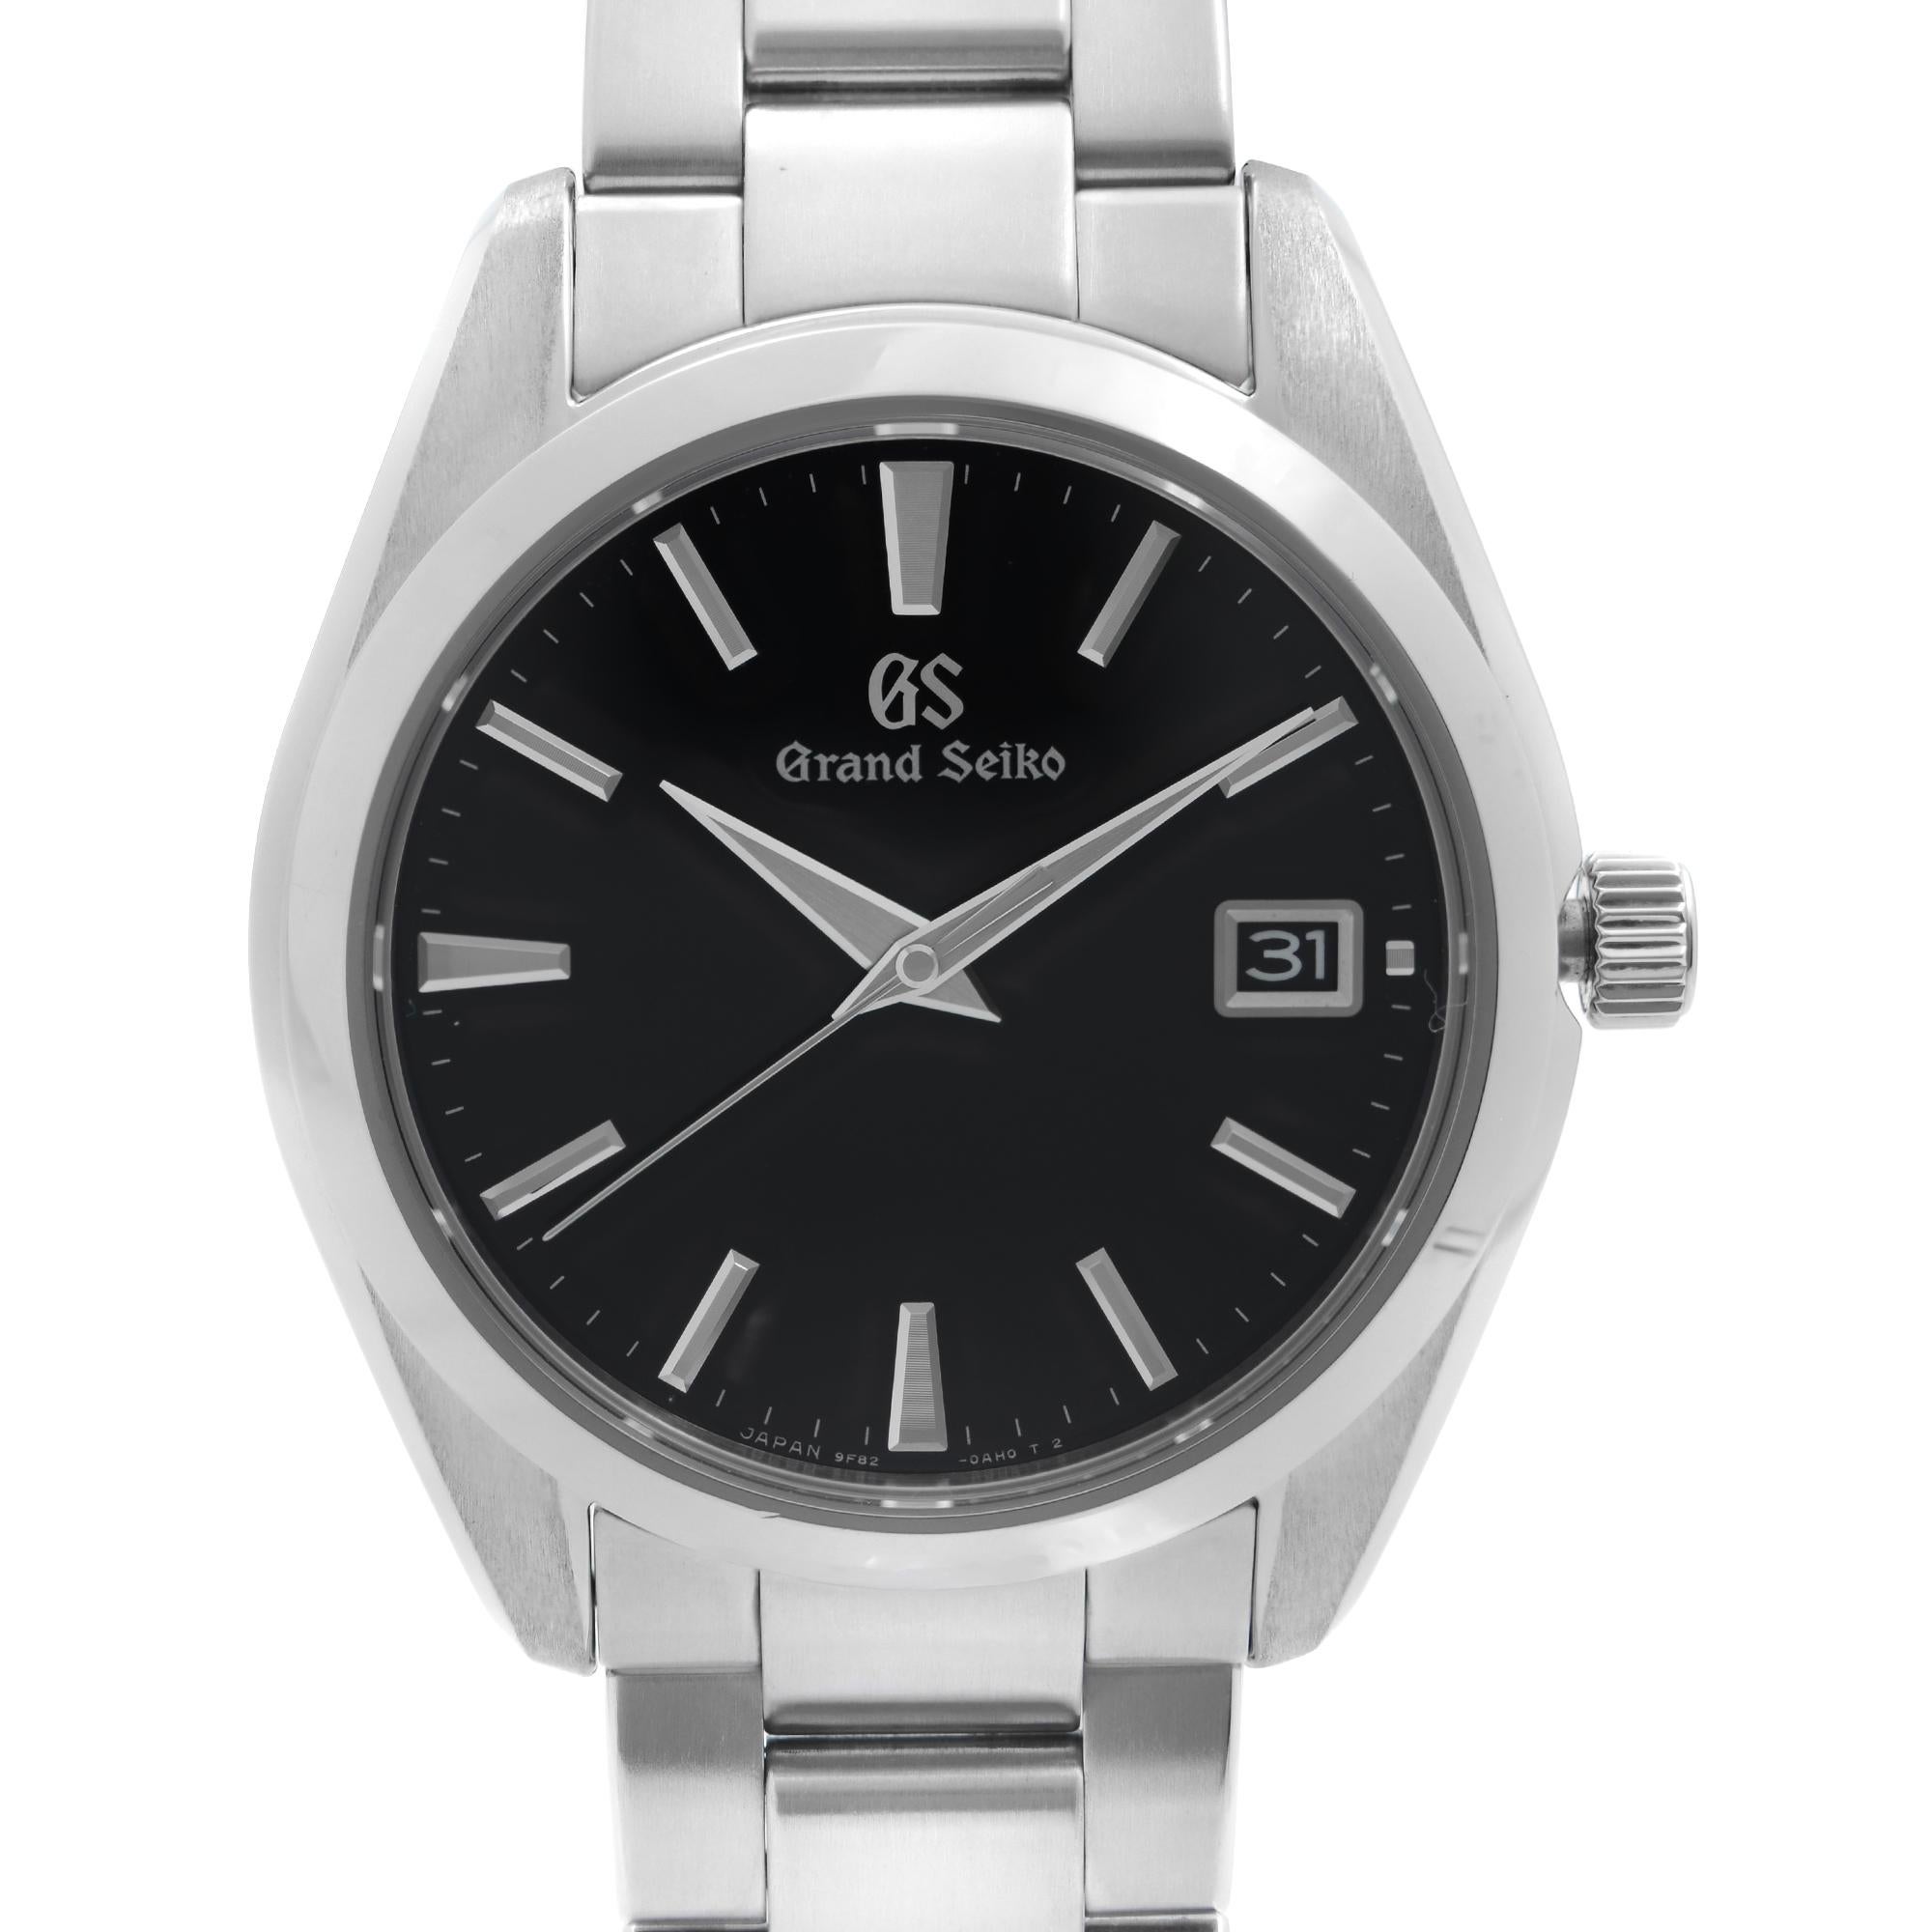 Store Display Model.  Grand Seiko Heritage Stainless Steel Black Dial Quartz Men's Watch SBGV223. This Beautiful Timepiece Features: Stainless Steel Case & Bracelet Fixed Stainless Steel Bezel, Black Dial with Silver-Tone Hands, and Index Hour